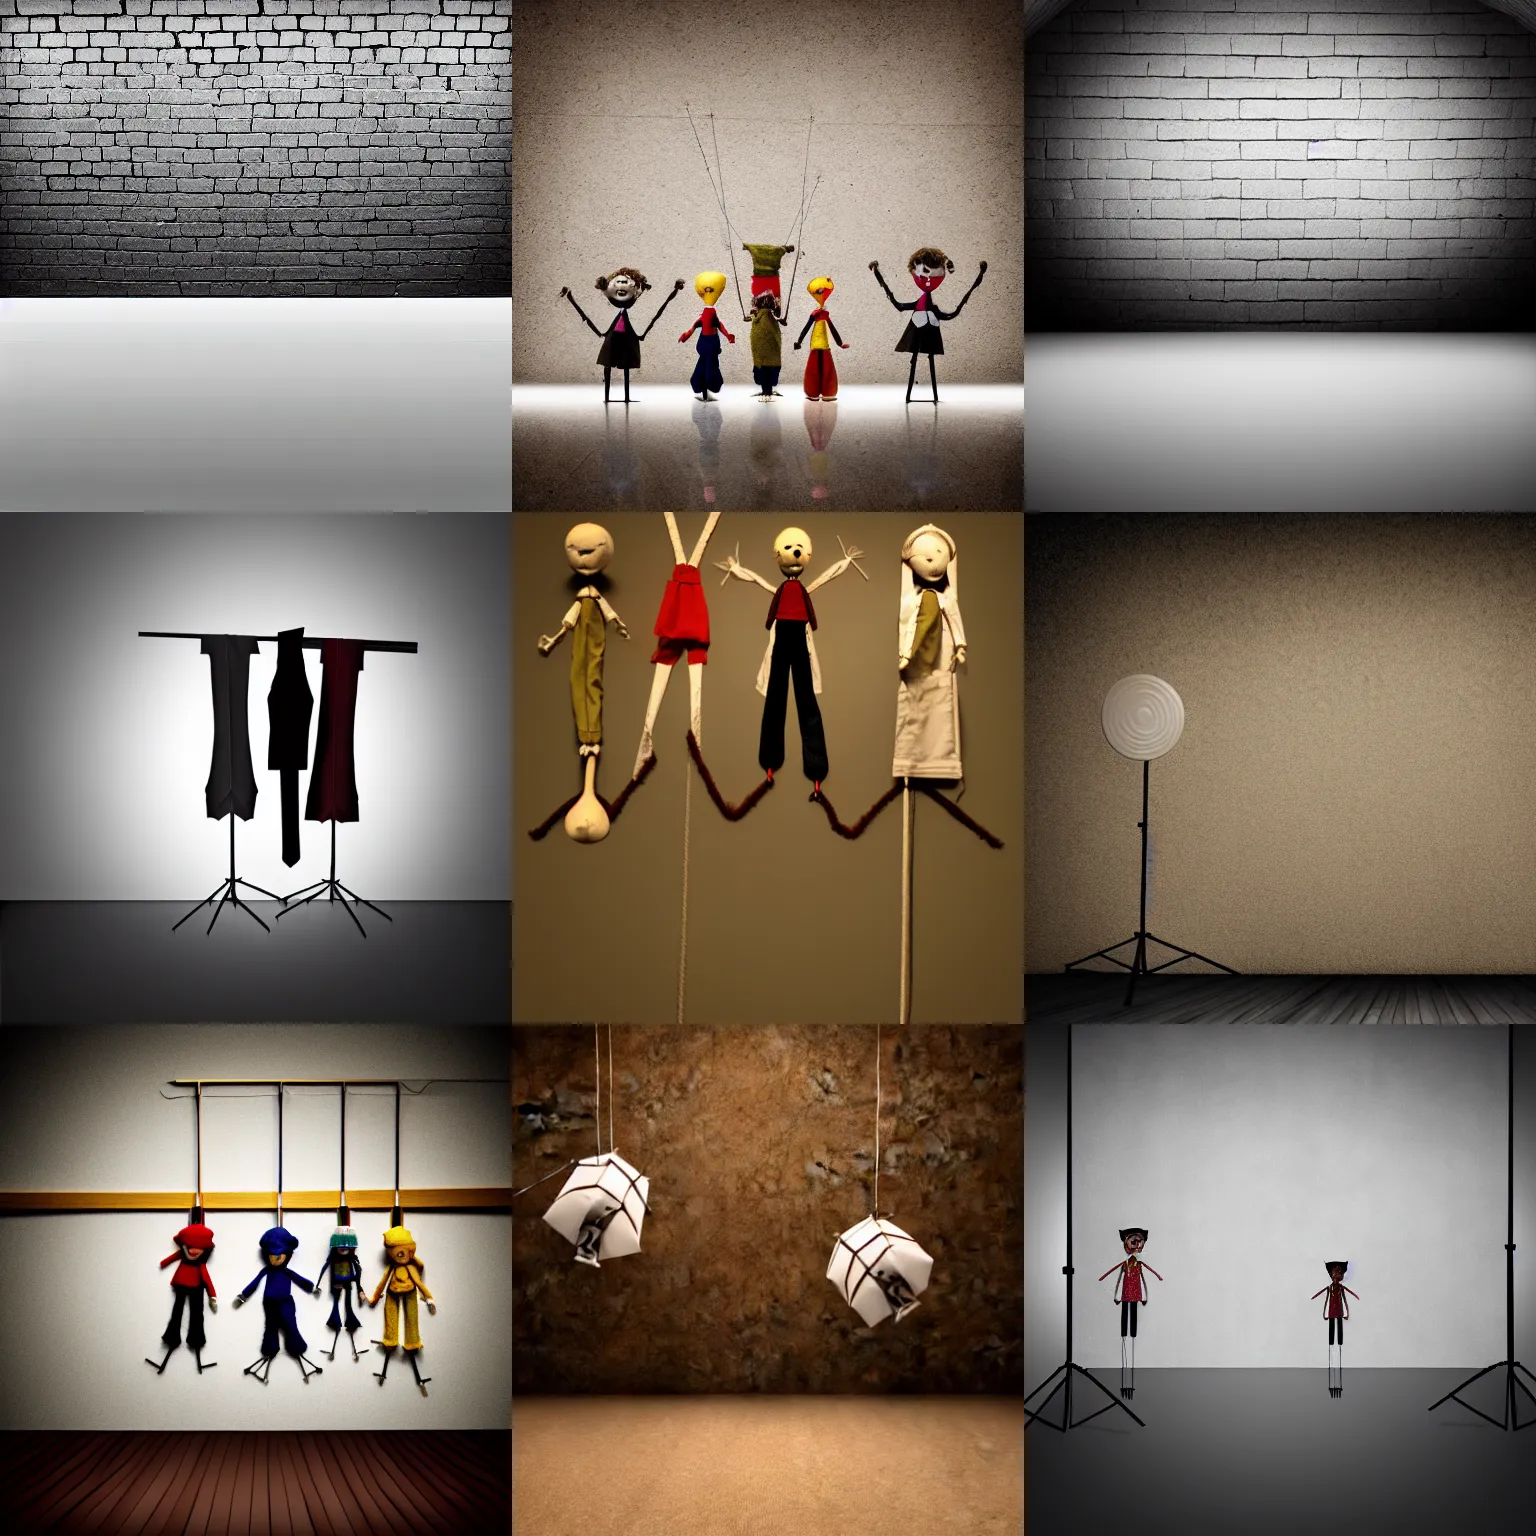 Prompt: marionettes, rule of thirds, studio lighting, random wall or scenery background